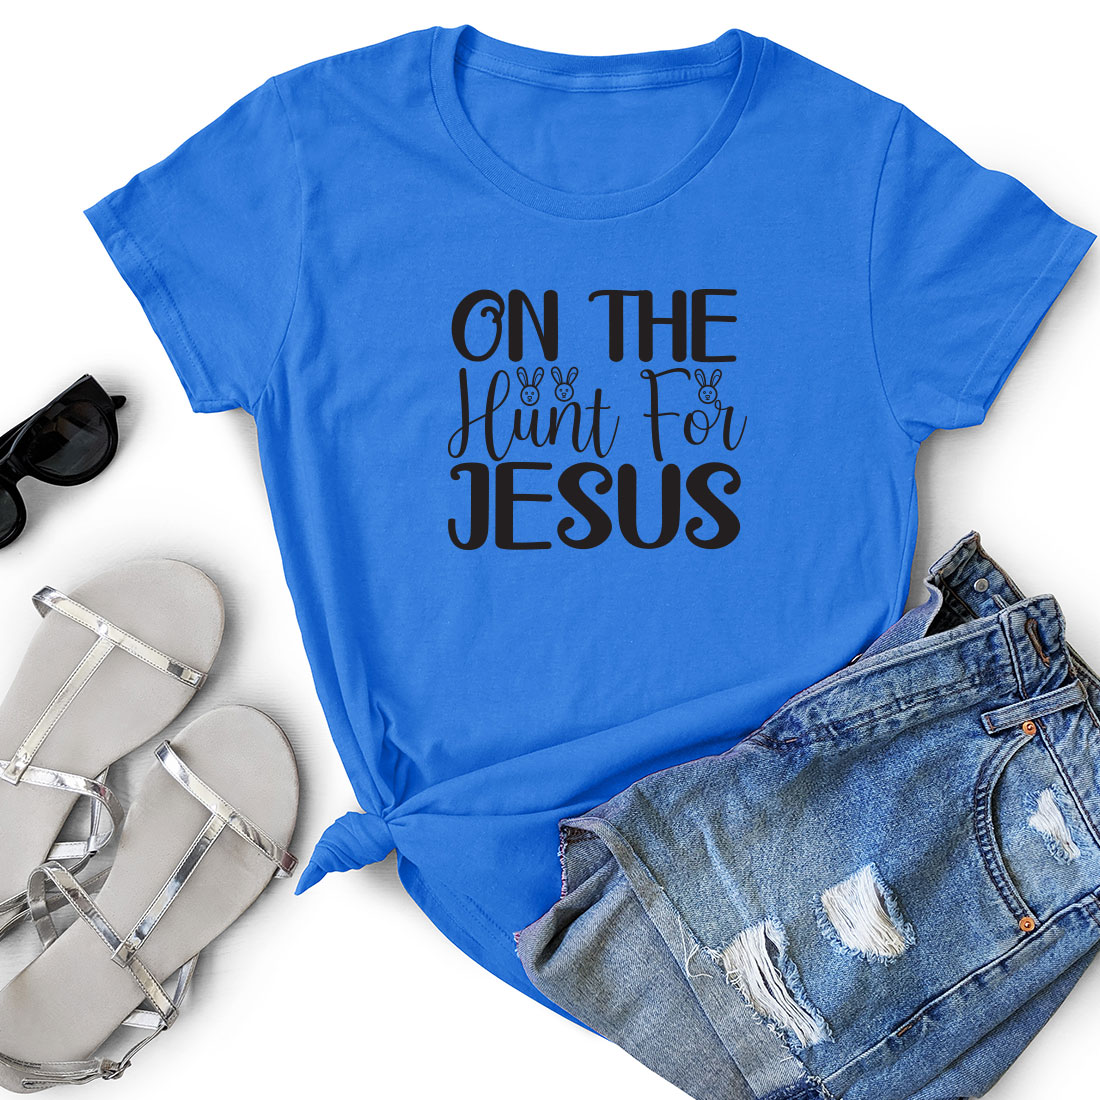 T - shirt that says on the hunt for jesus.